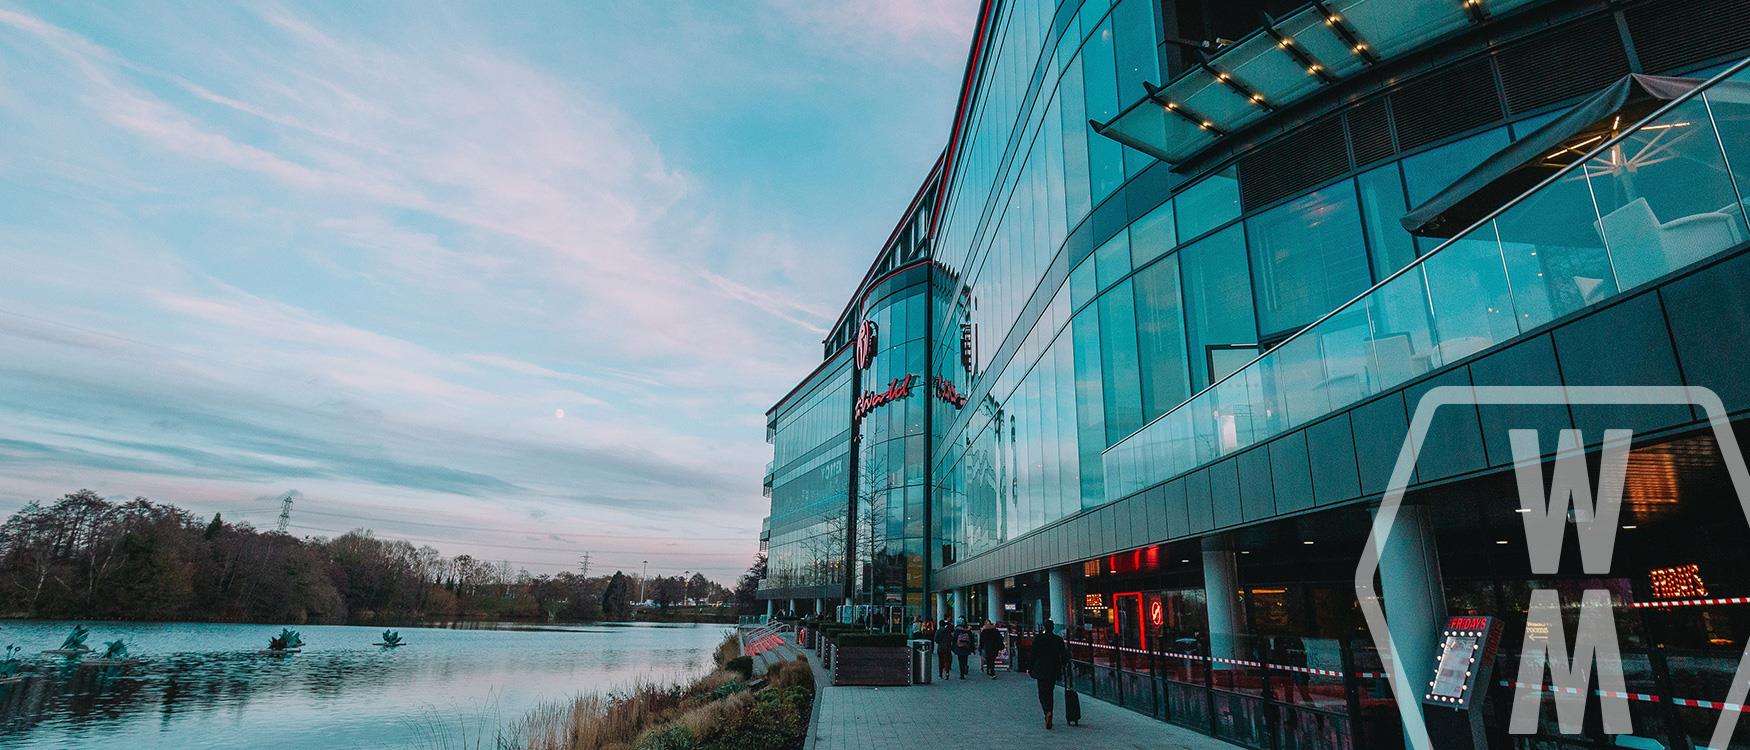 Solihull - A town that has grown, inspired and innovated. Home to the iconic Resorts World and its Arena, where you can watch some of the best gigs in the region.